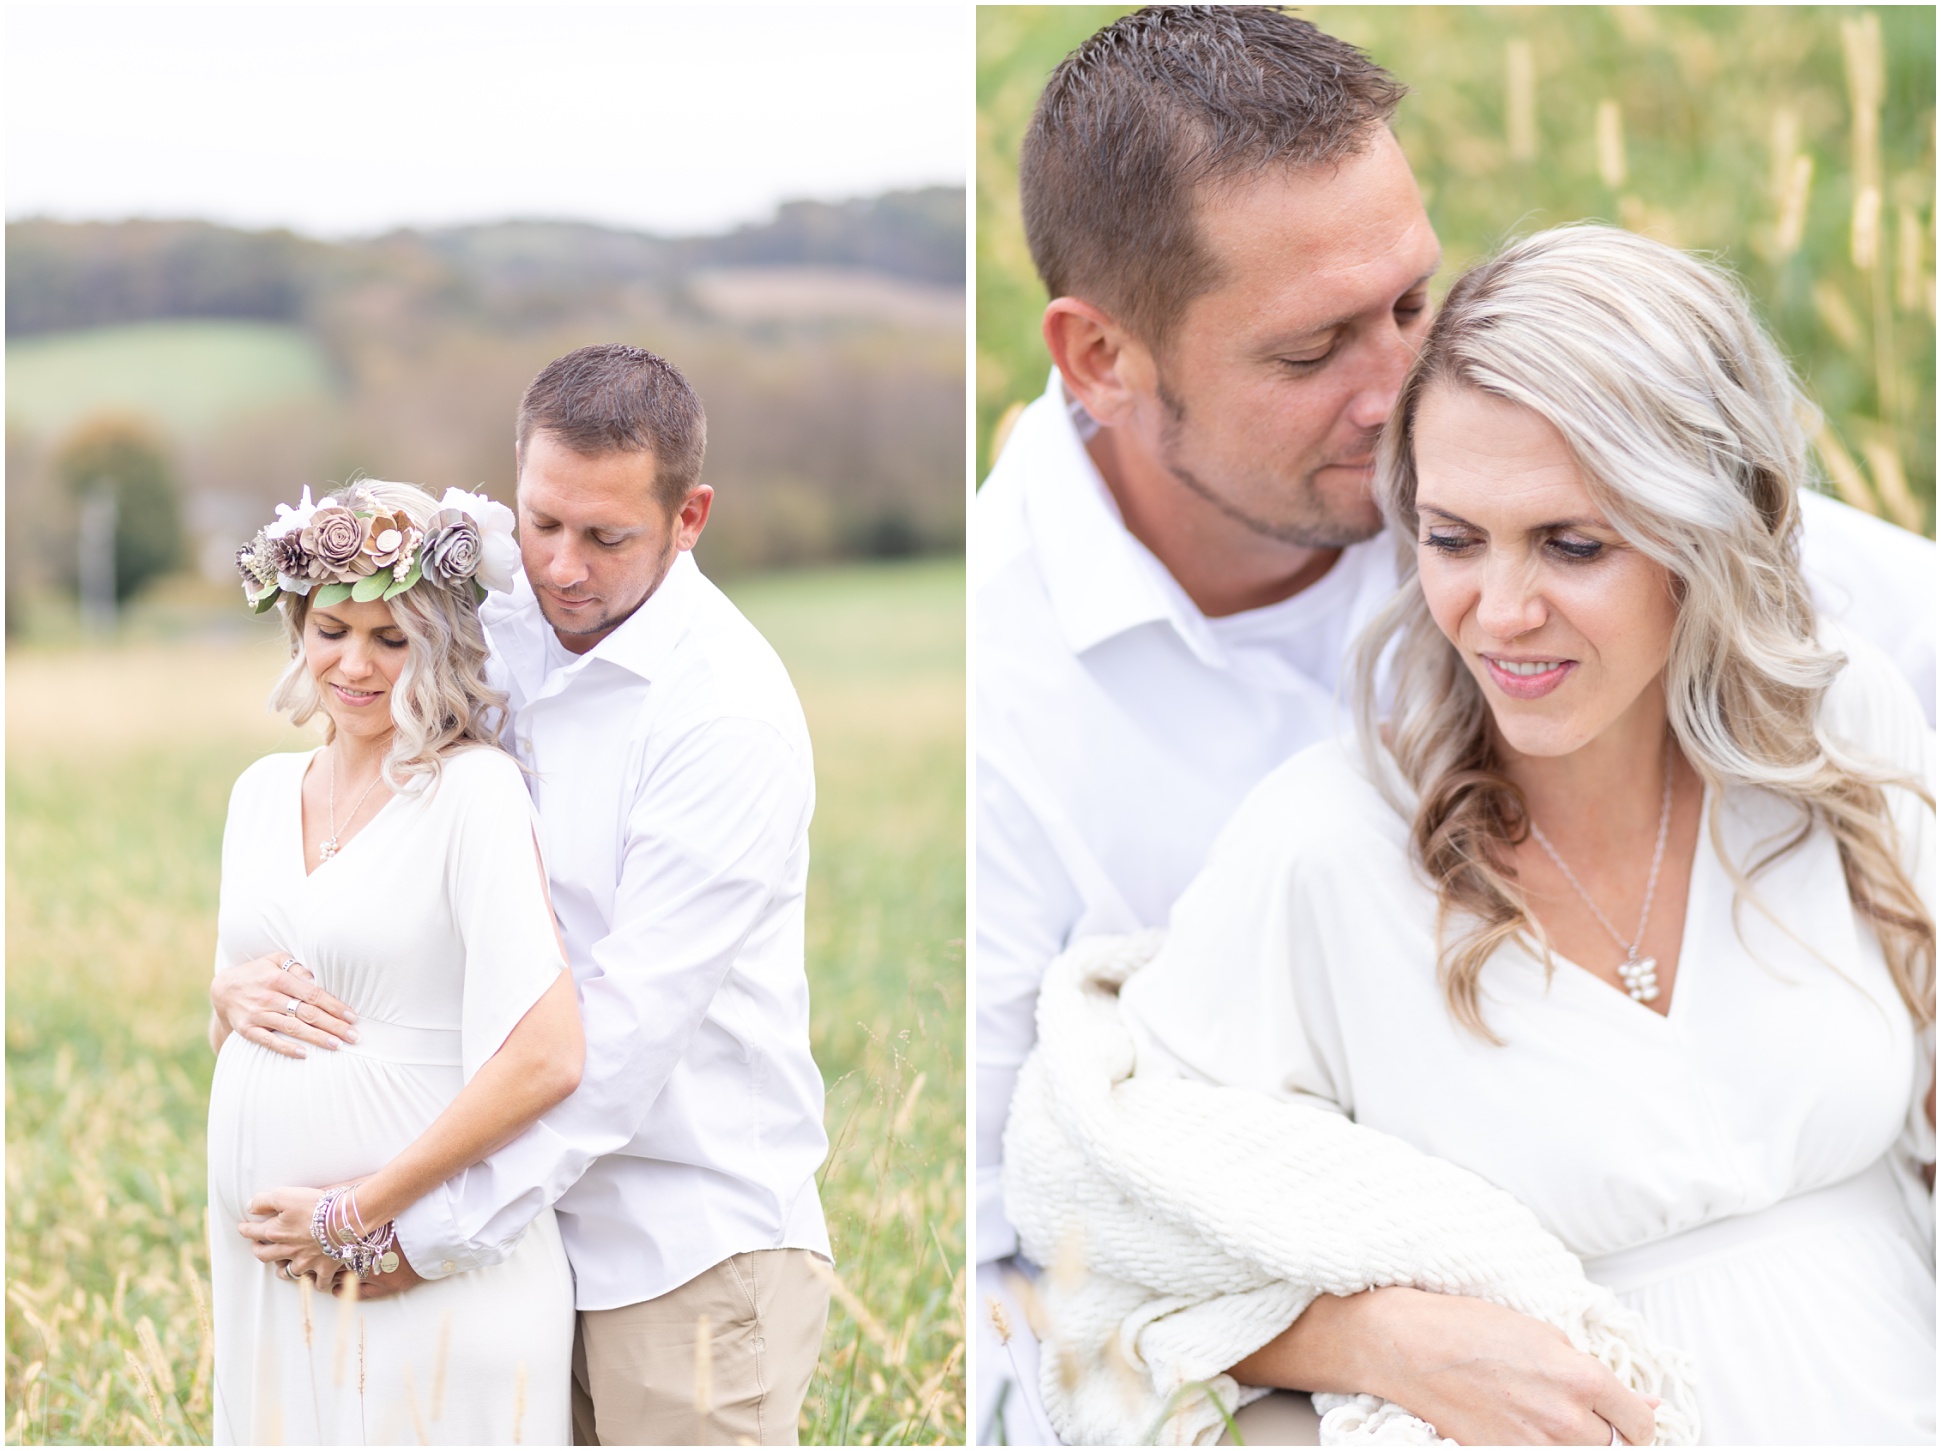 Rebecca and Scott in the field for their maternity session. Rebecca in a white dress with a fall flower crown